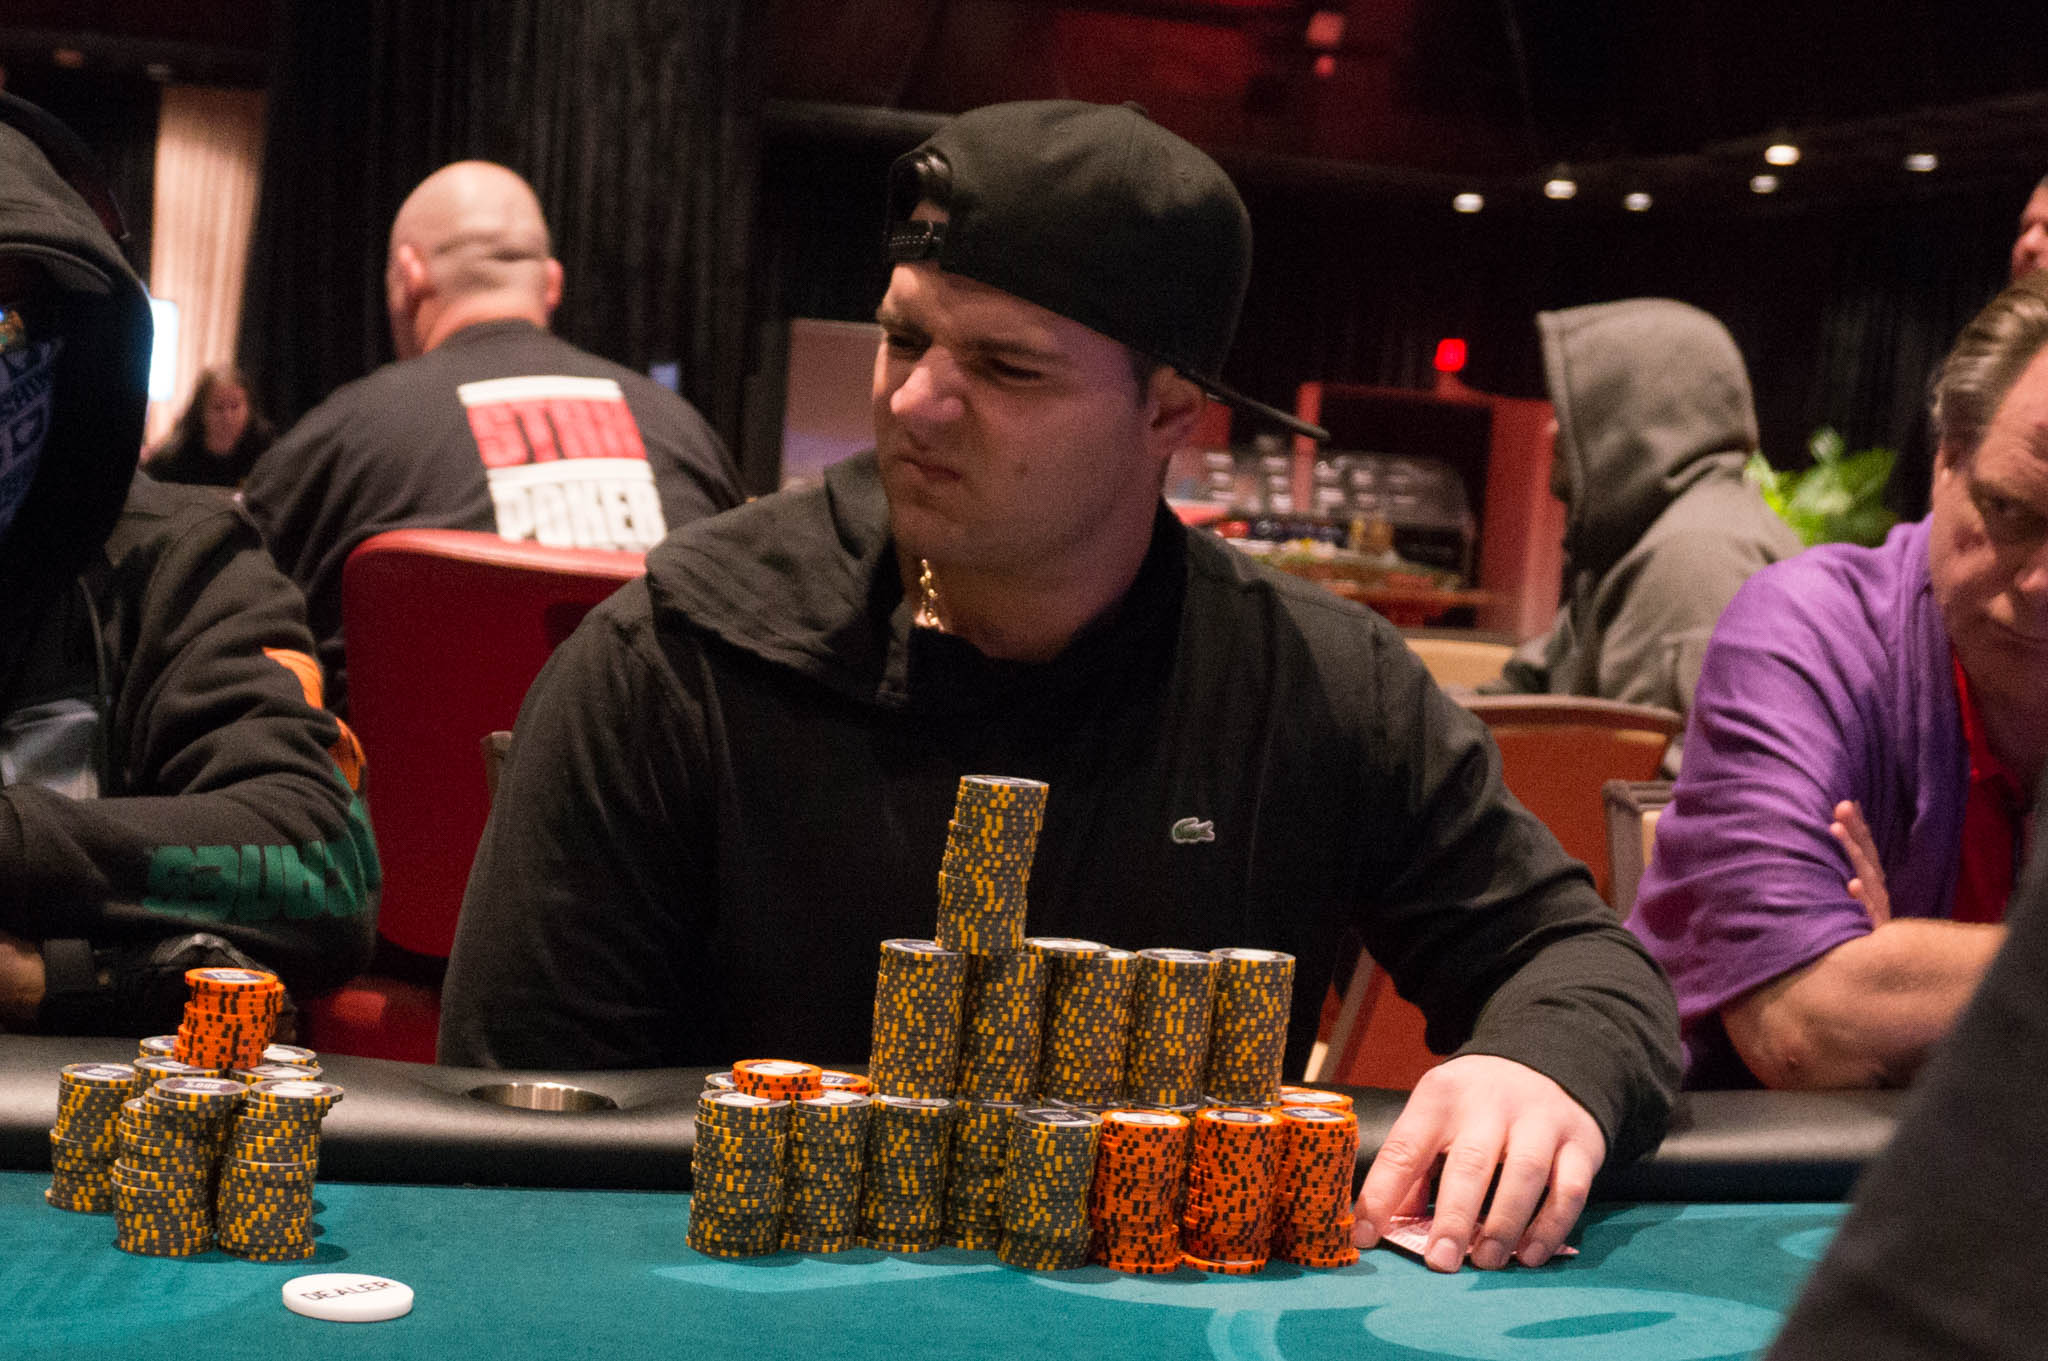 John Depersio doesn't like what he smells, but does like his stack